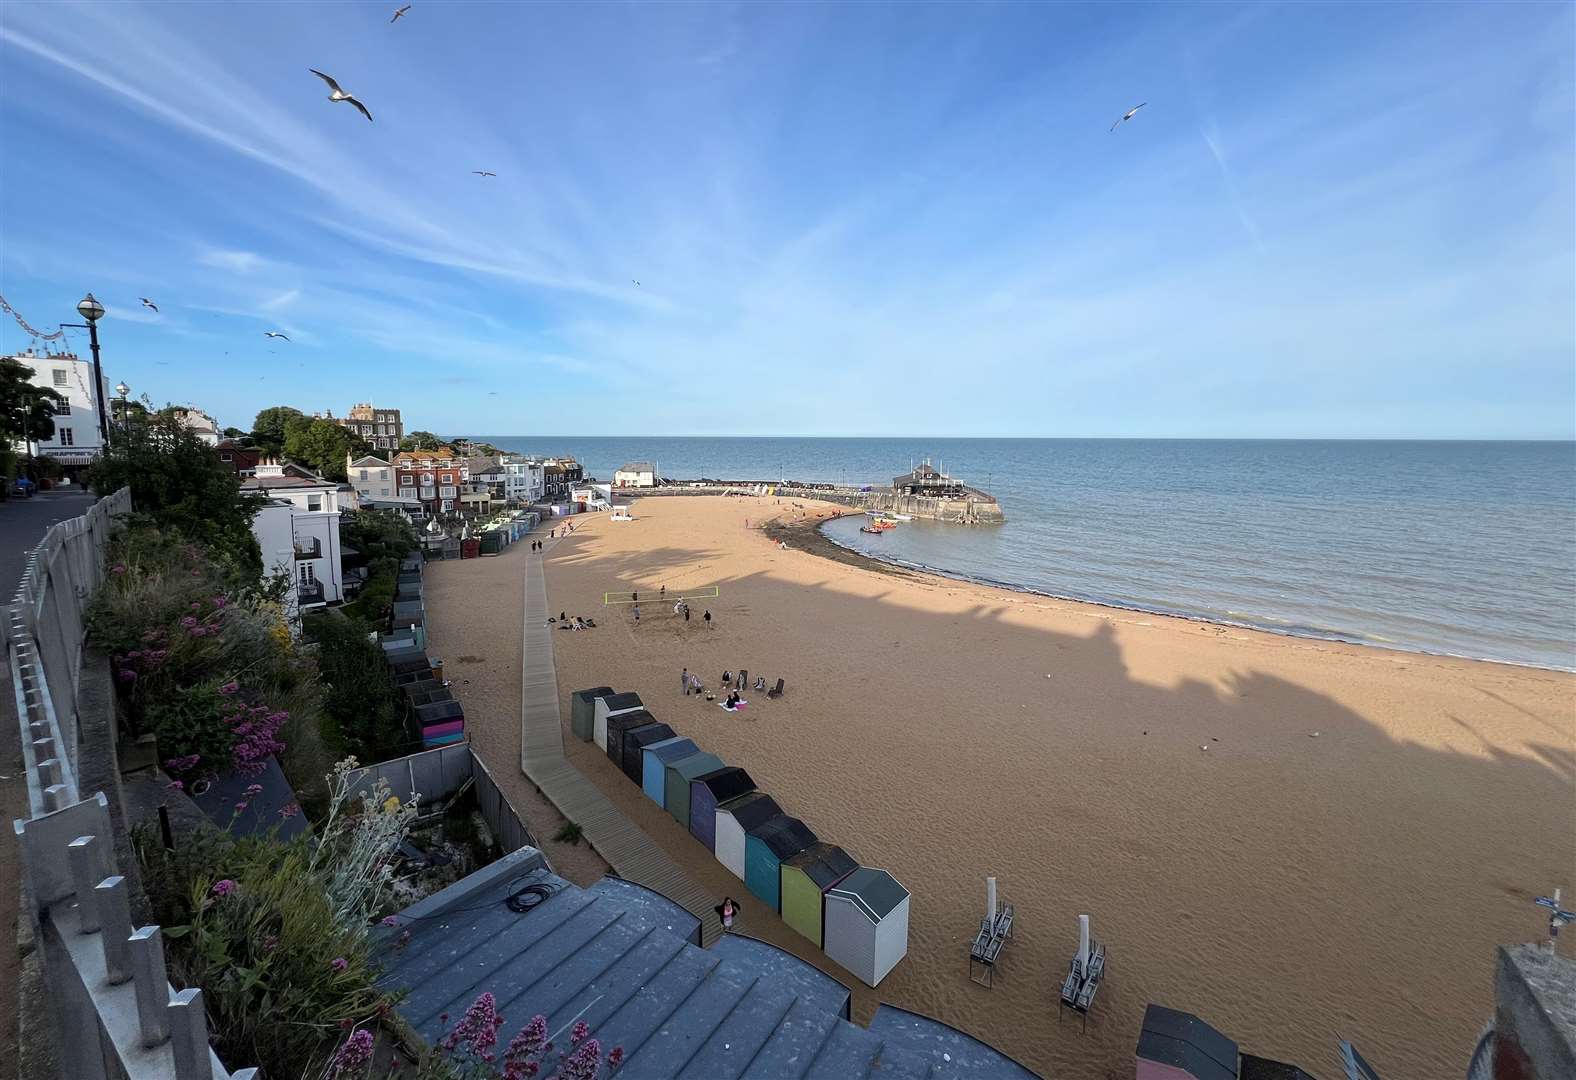 What a site - Broadstairs is a real gem of a place